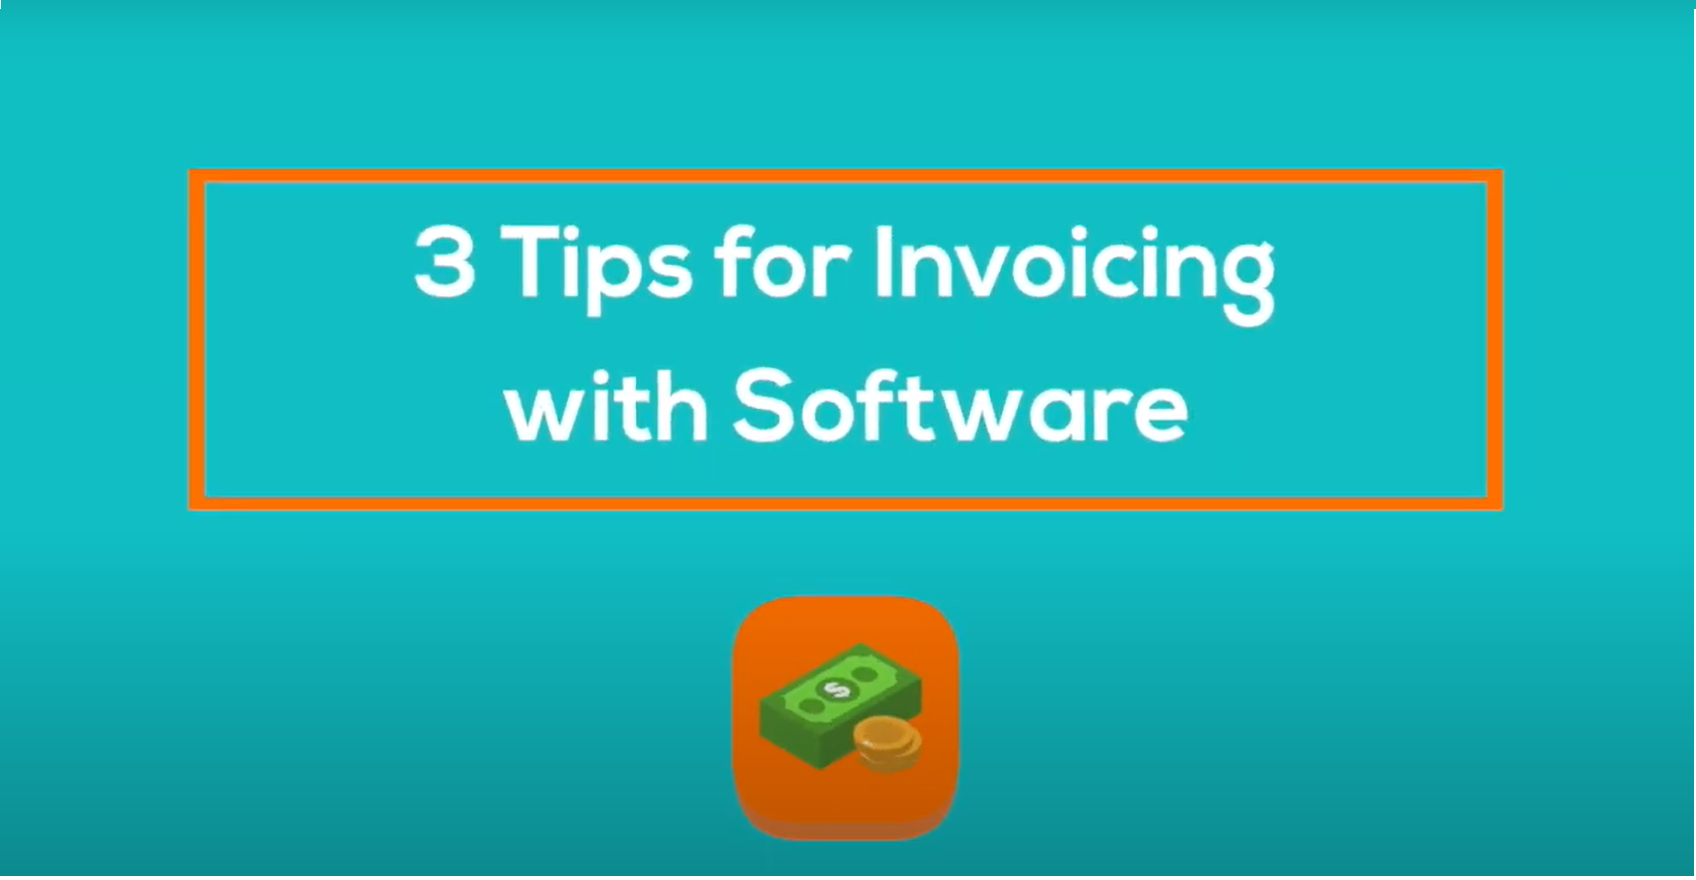 3 Top Tips for Invoicing with Software